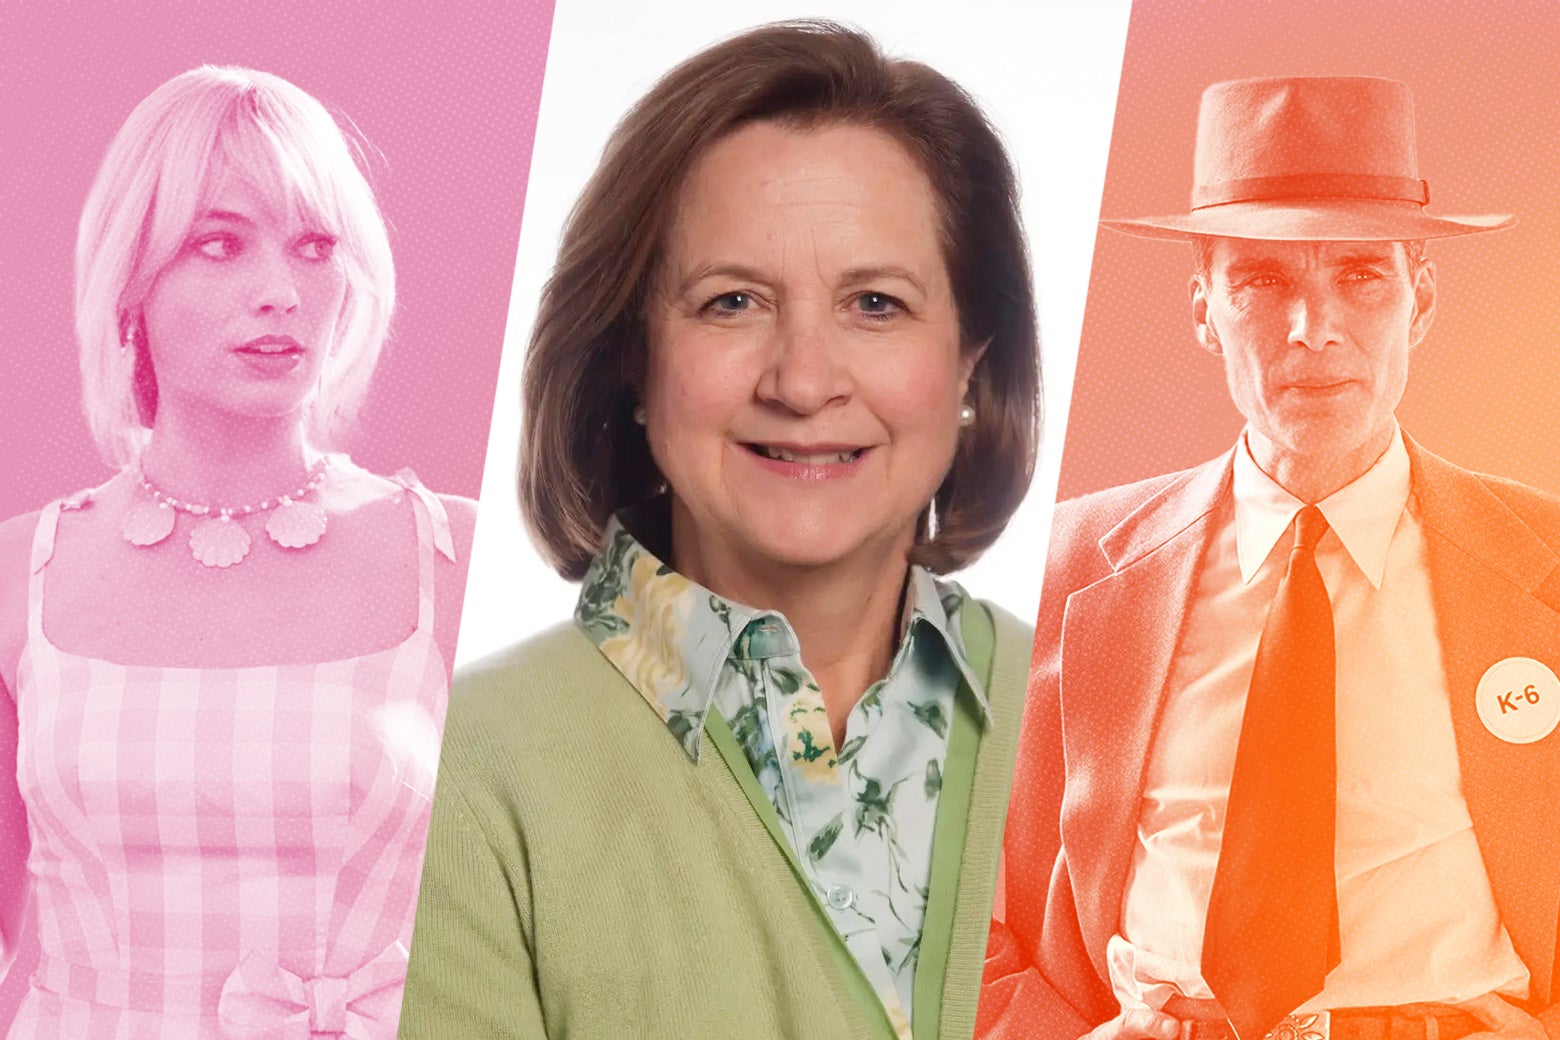 On the left, a pink-hued photo of Margot Robbie in a checker dress as Barbie. On the right, Cillian Murphy in a suit and a hat and a "K-6" button as J. Robert Oppenheimer. In the middle, a somewhat older woman with light brown hair in a bob, pearl earrings, and a green cardigan over bluish-green floral pattern shirt.